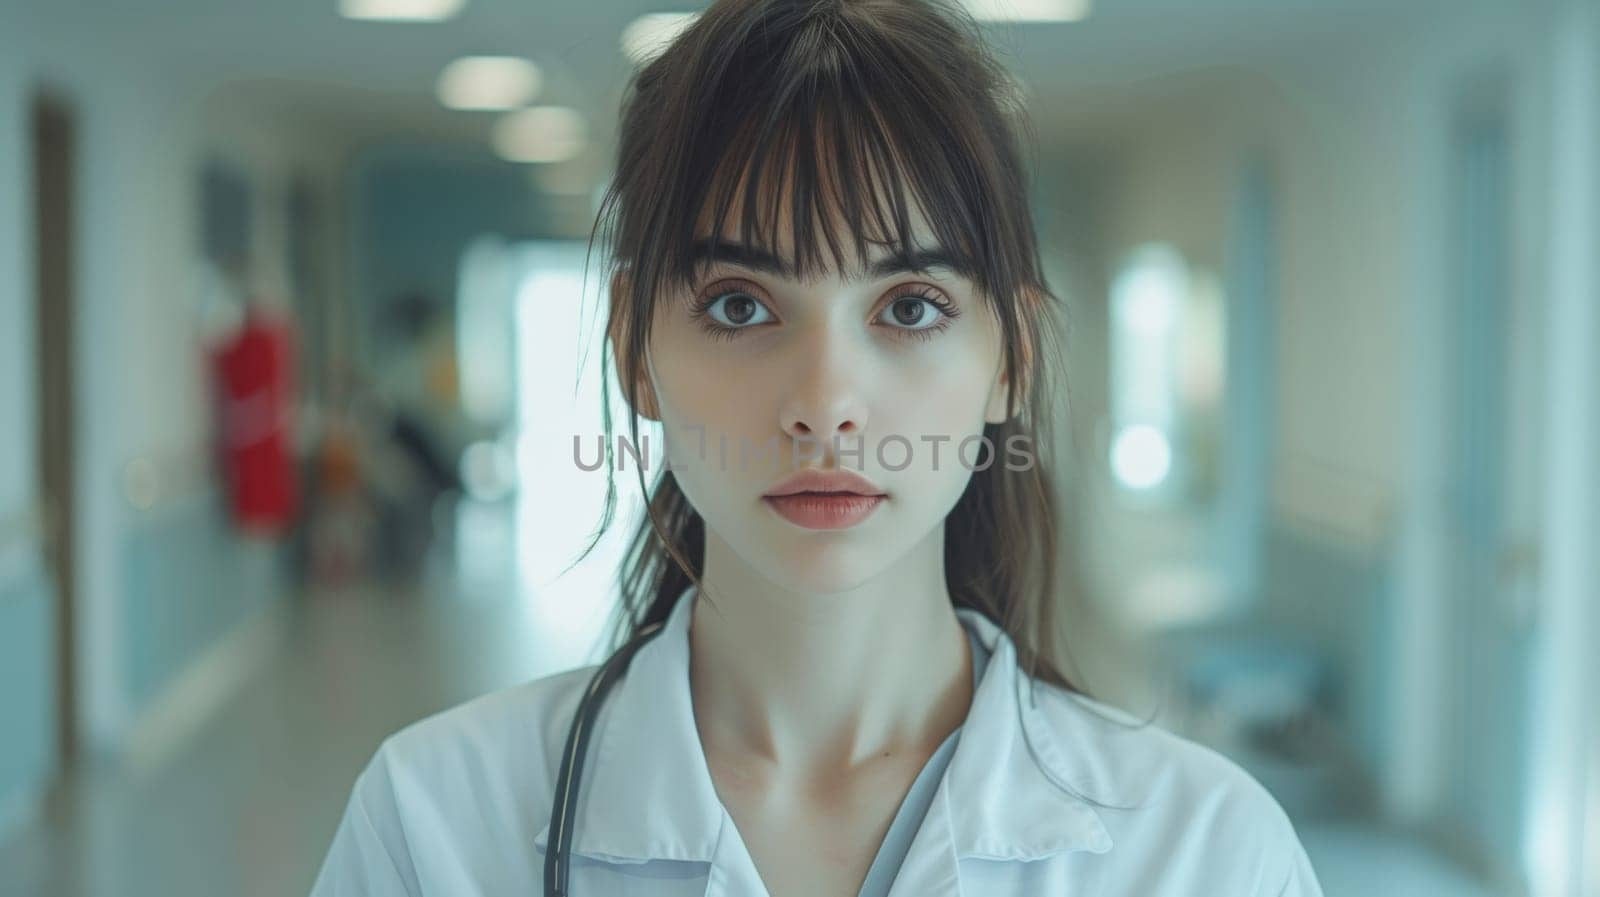 A woman in a white shirt and stethoscope standing by the wall